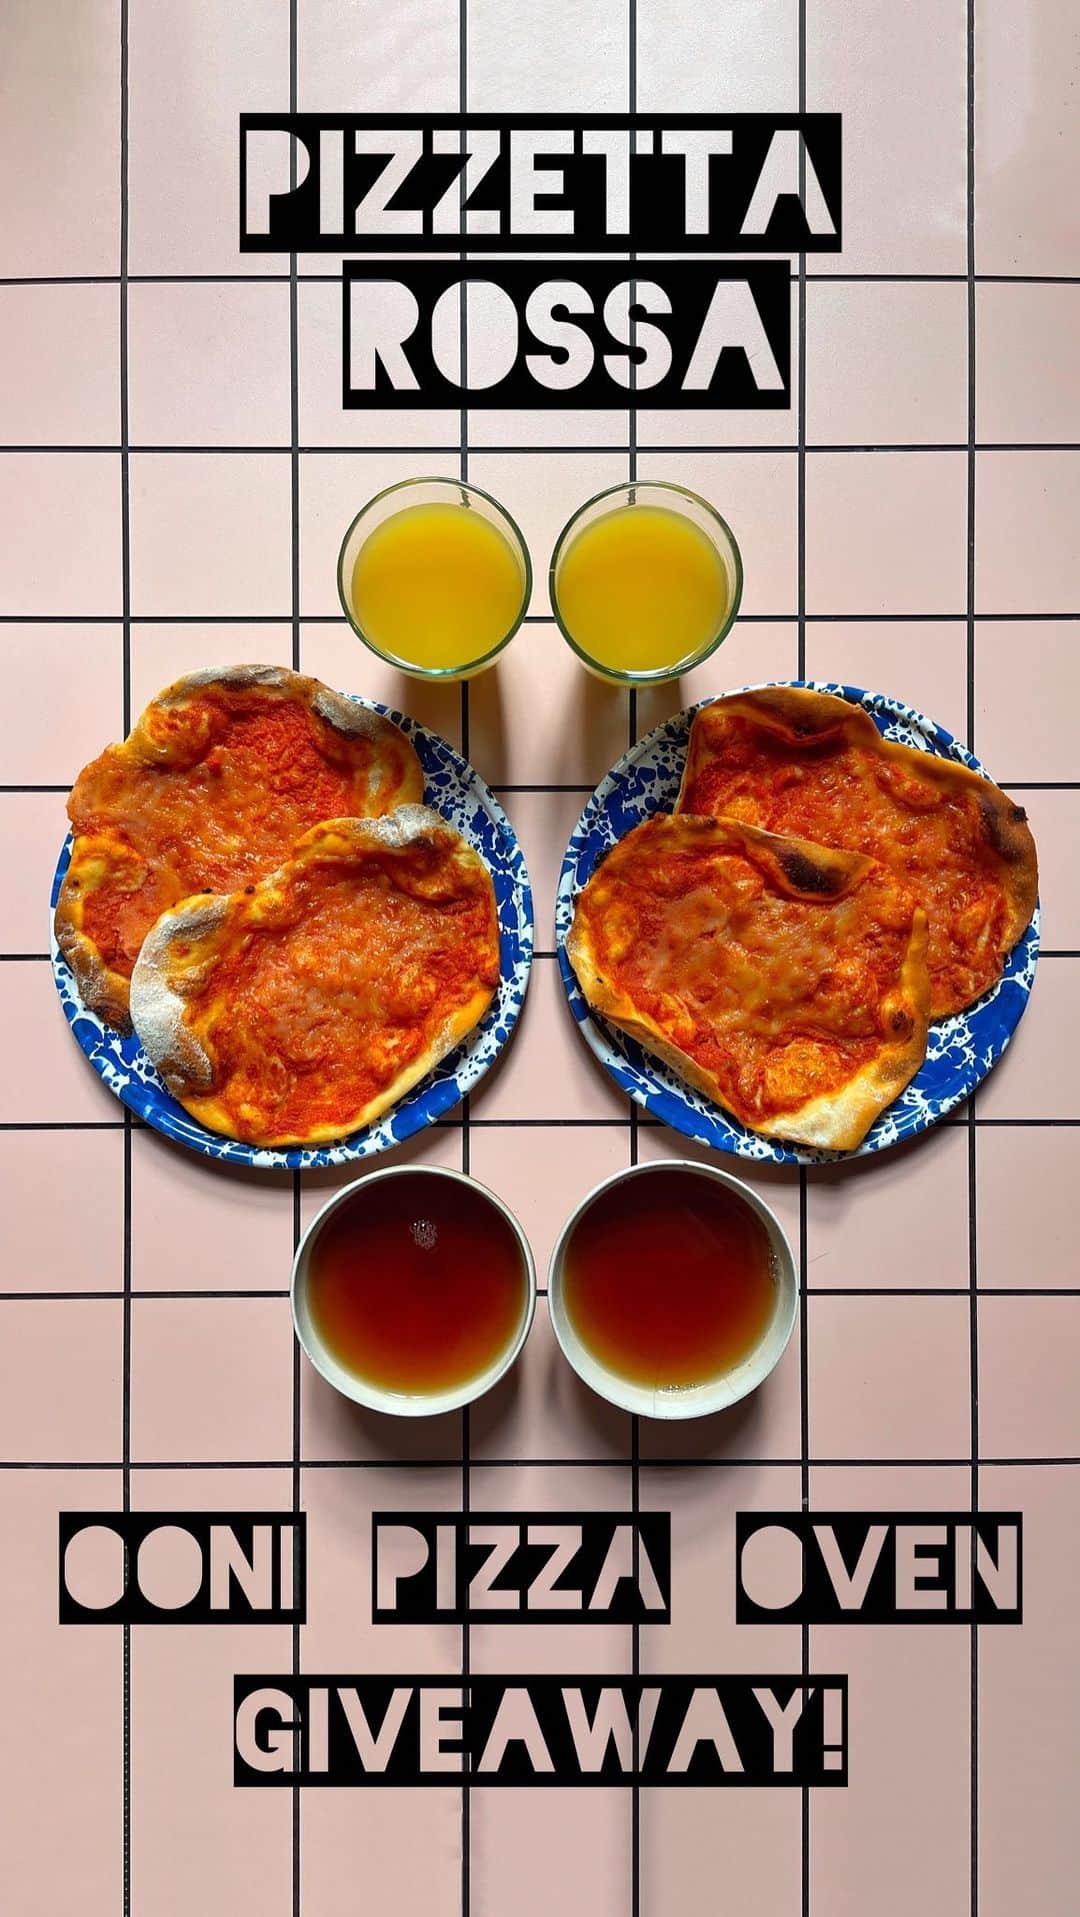 Symmetry Breakfastのインスタグラム：「#ad COMPETITION CLOSED! Do you want to win an @ooni.uk pizza oven? Competition below! Recipe pinned in the comments   Pizza…for breakfast? Well when @ooni.uk asked me to come up with an idea to #makepizza it had to be for breakfast! I was recently introduced to @linari1971 in Rome and their absolutely delicious pizzetta rossa, I couldn’t help but be inspired. They started making these scrumptious little things over 50 years ago selling just a few a day. Now they make 500 every morning for hungry Romans that cannot get enough. My version is a very simple dough but the twist is instead of the tomato sauce like Linari, a Bomba Pugliese so full of flavour with a delicious kick of spice. - - - - - - - - - - - - - - - - - - - To enter the competition to win your very own @ooni.uk Koda 12” pizza oven all you need to do is. 1 – Follow @symmetrybreakfast 2 – Follow @ooni.uk 3 – Tag a friend in the comments, you can tag as many friends as you like and each new tag is a new entry. Enter by Friday 28th October at 12.00 noon BST - Winners will be contacted directly via DM on Monday 31st October - UK only - 18+ only - You will only be contacted by this account, we won’t ever ask for bank details. - Winner will be selected at random - This promotion is in no way sponsored, endorsed, or administered by or associated with Instagram. Good Luck Everyone! #symmetrybreakfast #makepizza #ooni」